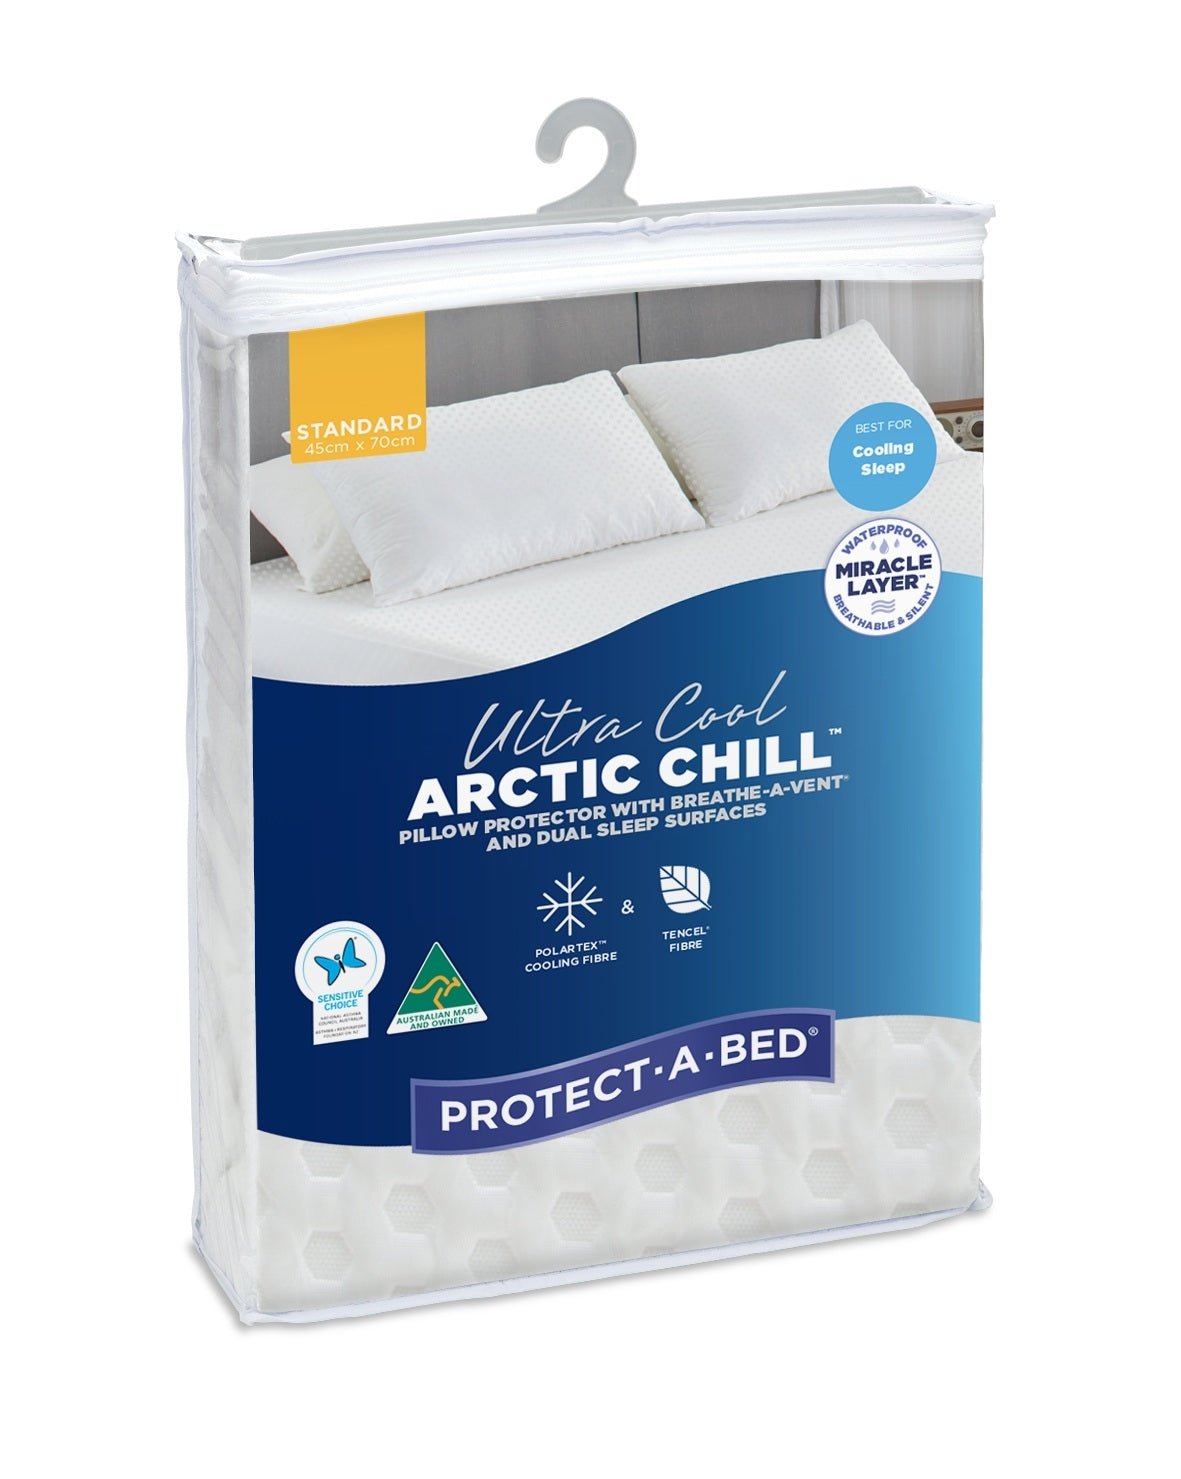 Protect-a-Bed Arctic Chill Pillow Protector - Mattress & Pillow ScienceProtection